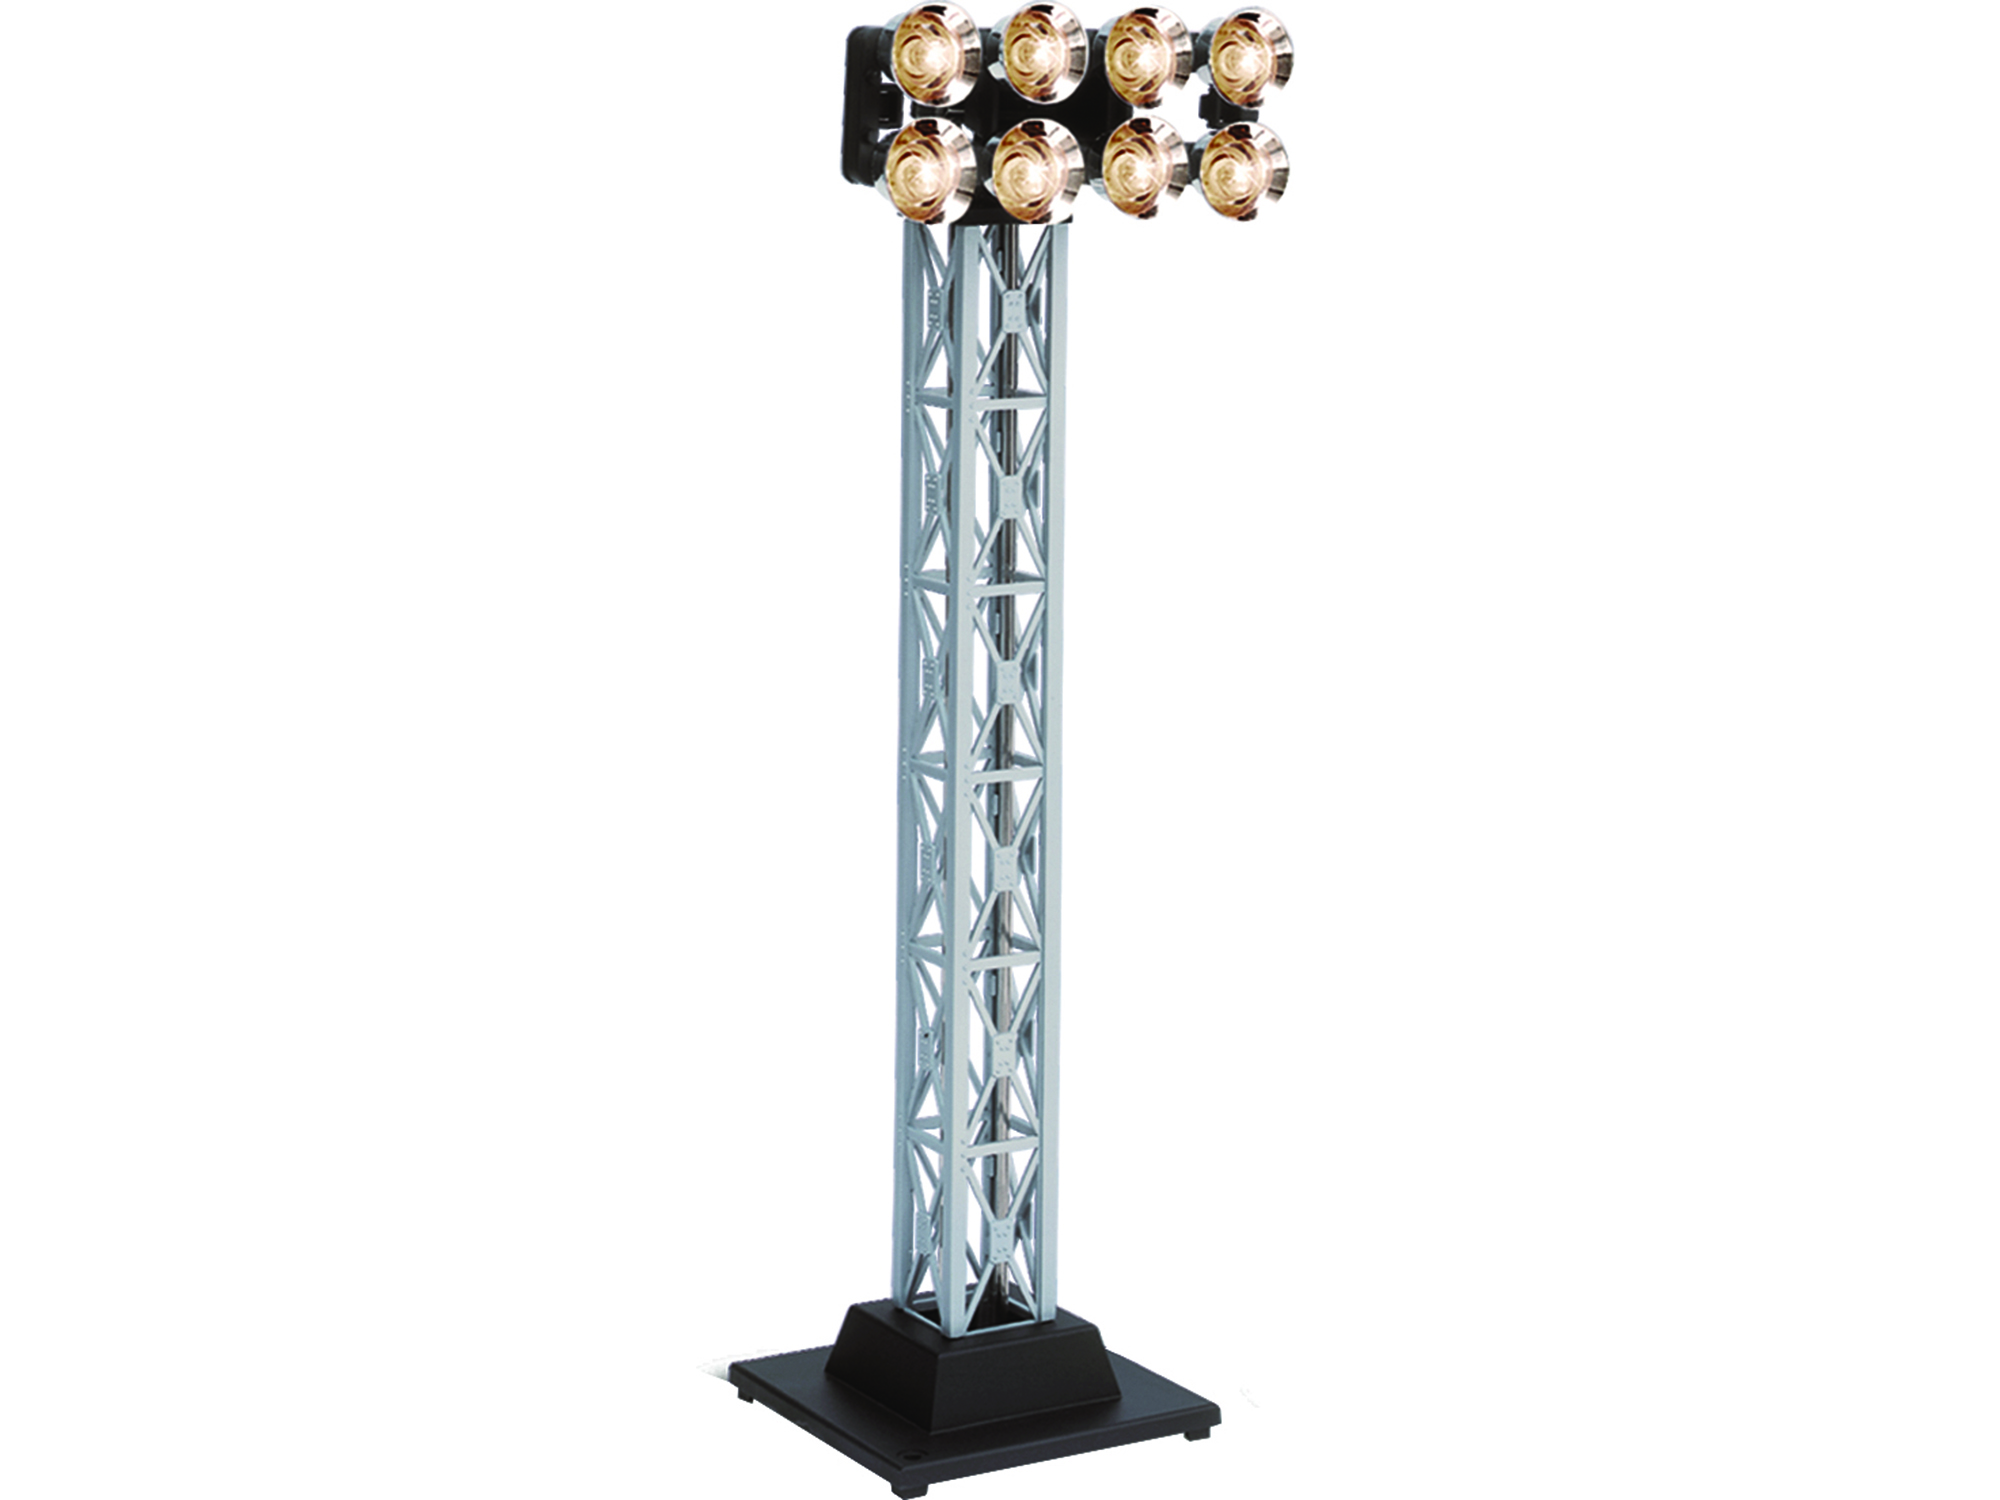 6-82012 SINGLE FLOODLIGHT TOWER - Click Image to Close